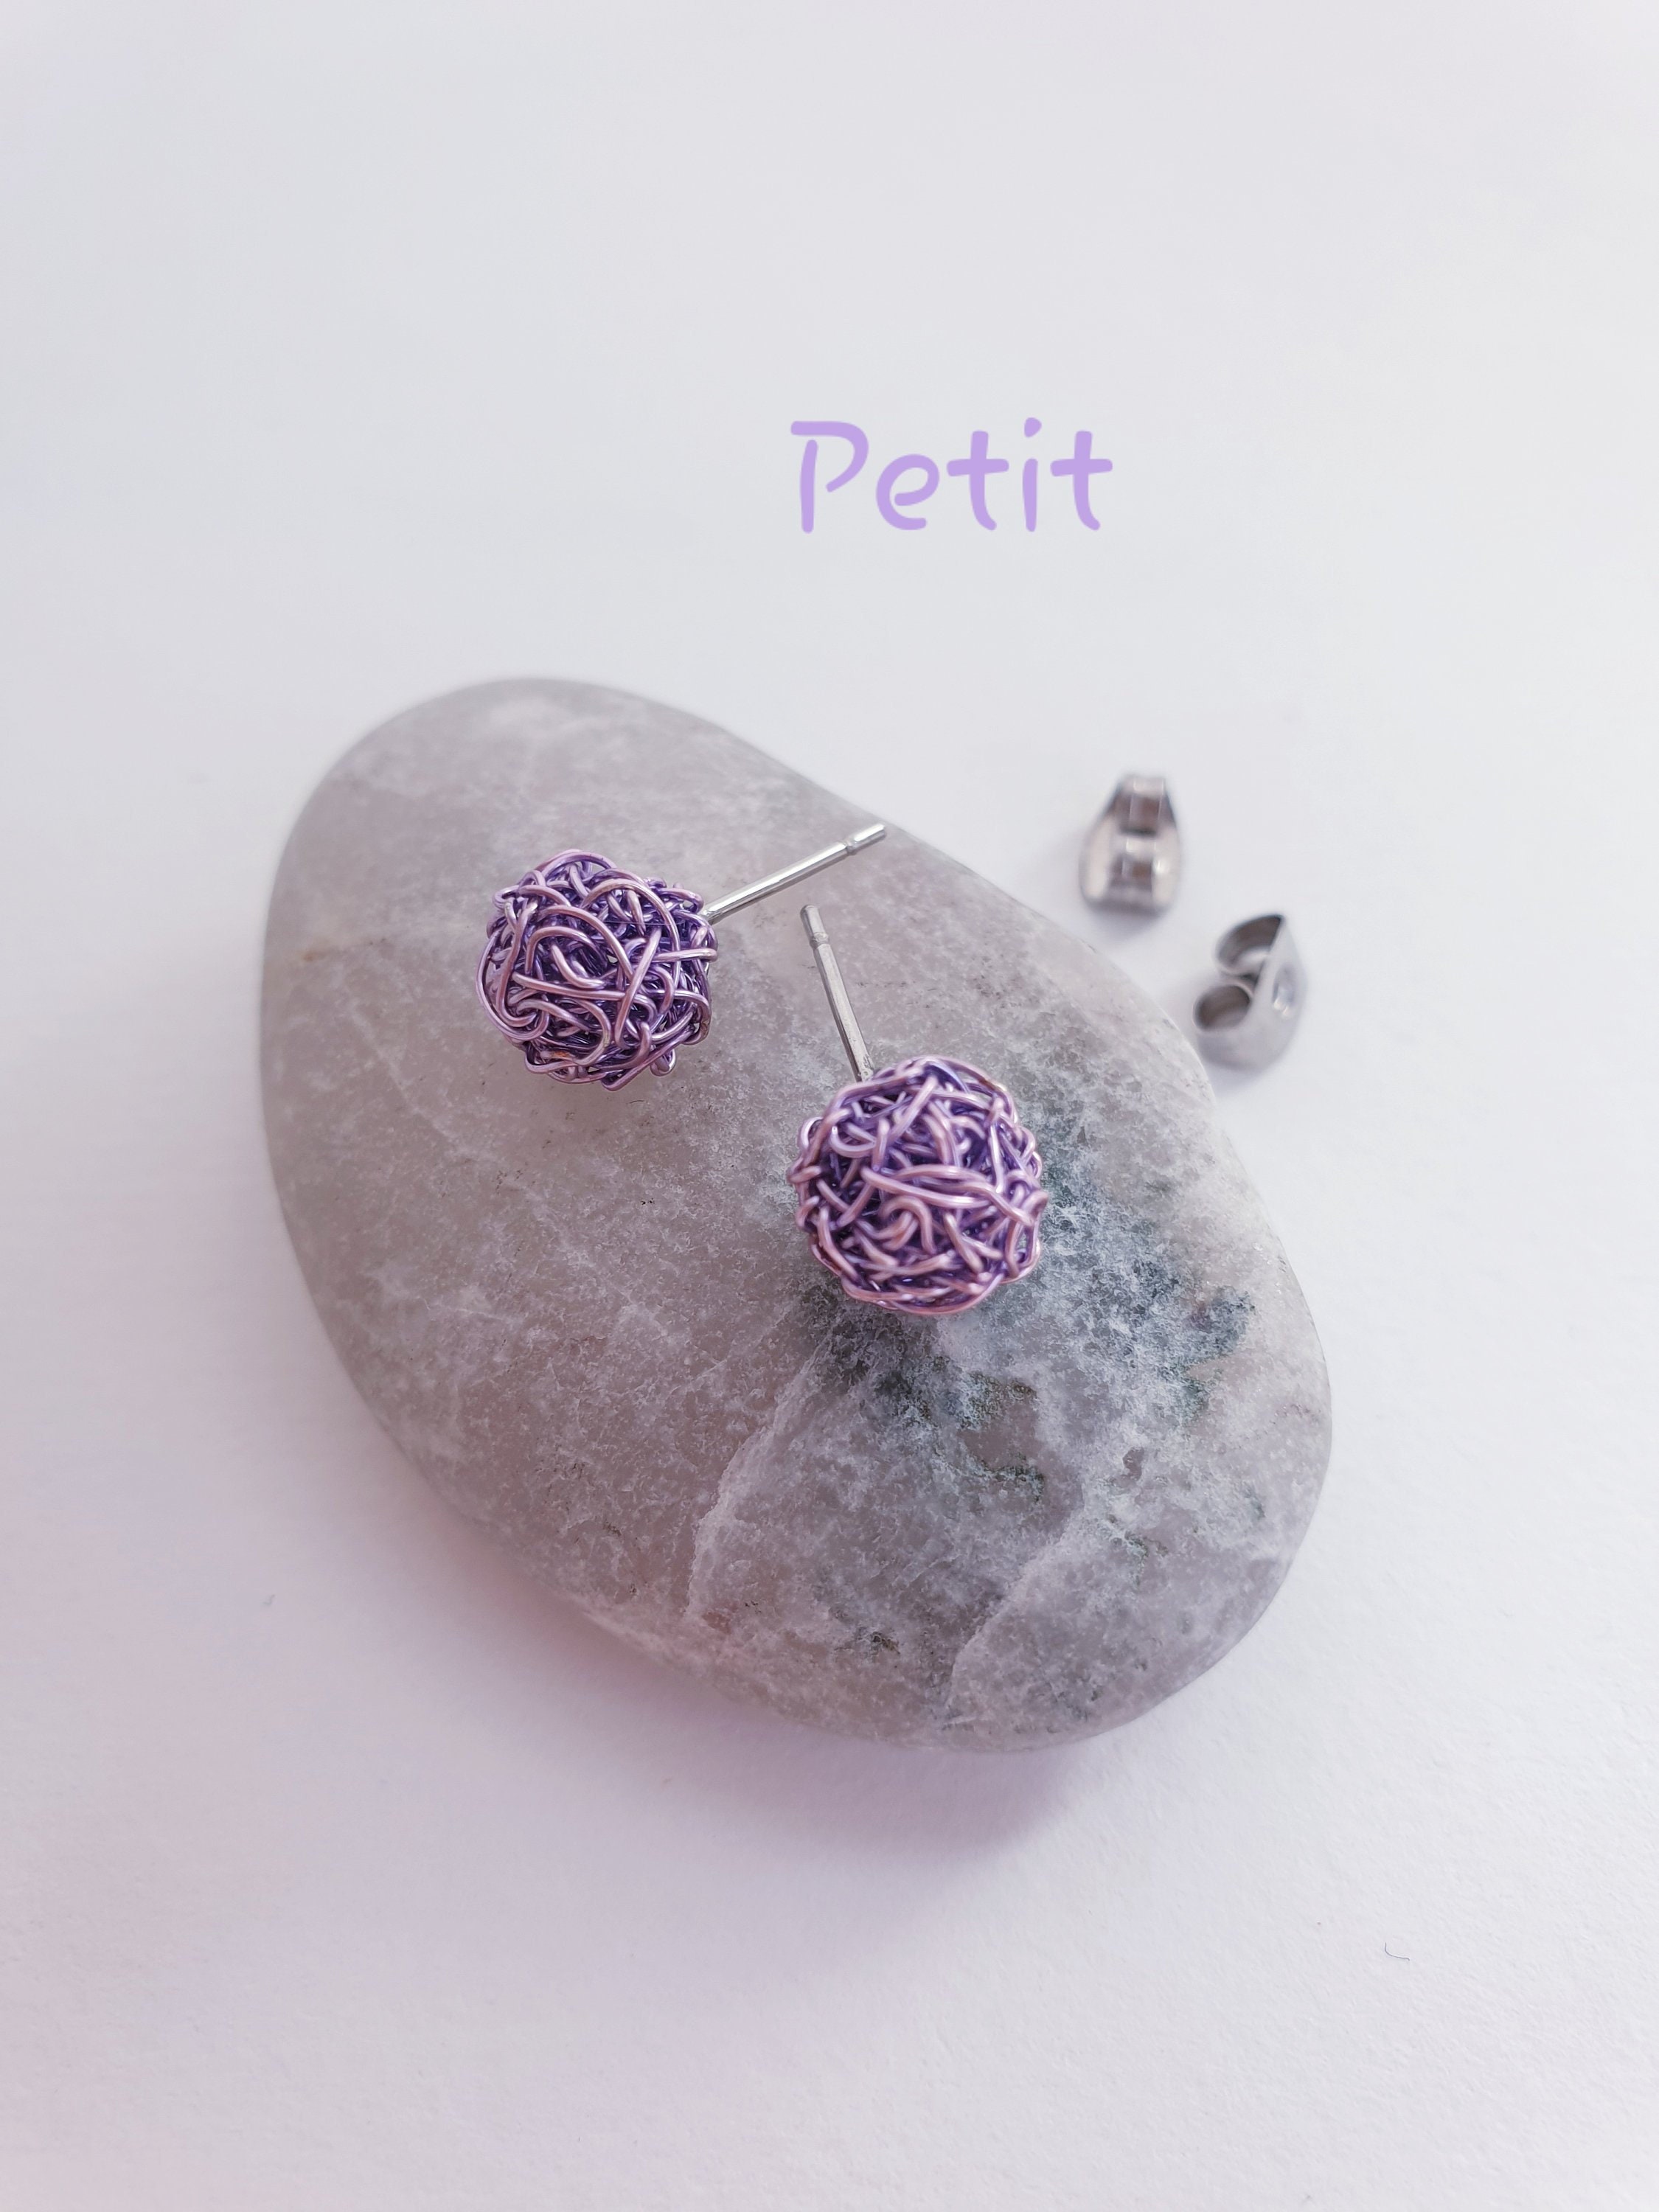 Knotted Violet Wire Stud Earrings Sterling Silver Minimalist Small Earrings Minimal  Bridemaids Studs Every Day  Earrings